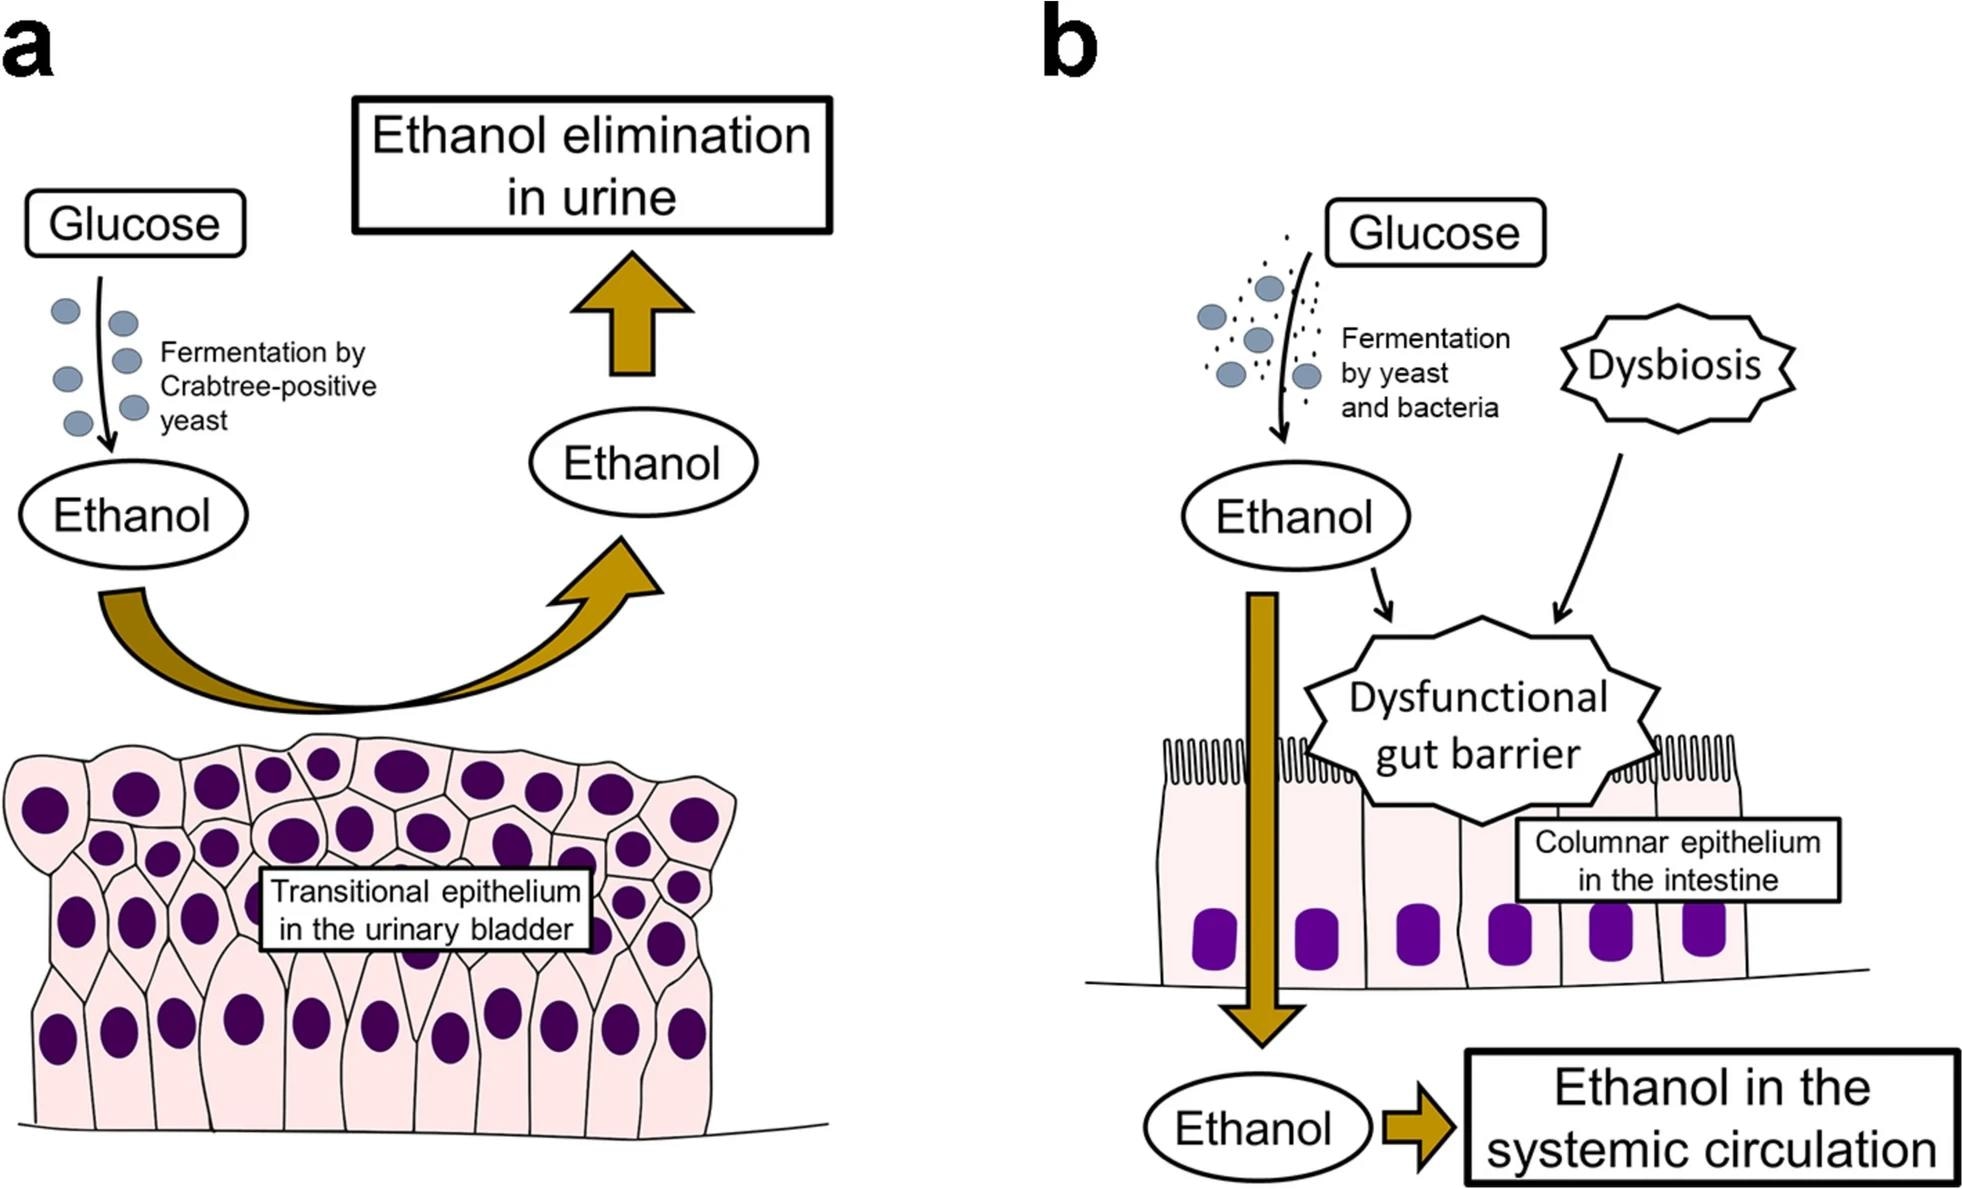 Pathophysiology of bladder fermentation syndrome and gut fermentation syndrome. a In bladder fermentation syndrome, ethanol produced through alcoholic fermentation by Crabtree-positive yeast is urinary-eliminated without getting absorbed into systemic circulation because the transitional epithelium in the urinary bladder serves as a barrier to ethanol. b In gut fermentation syndrome, ethanol produced through alcoholic fermentation by yeast and/or bacteria is absorbed into systemic circulation through the columnar epithelium in the intestine, causing alcohol intoxication. A dysfunctional gut barrier caused by dysbiosis and ethanol may also be involved in its pathogenesis